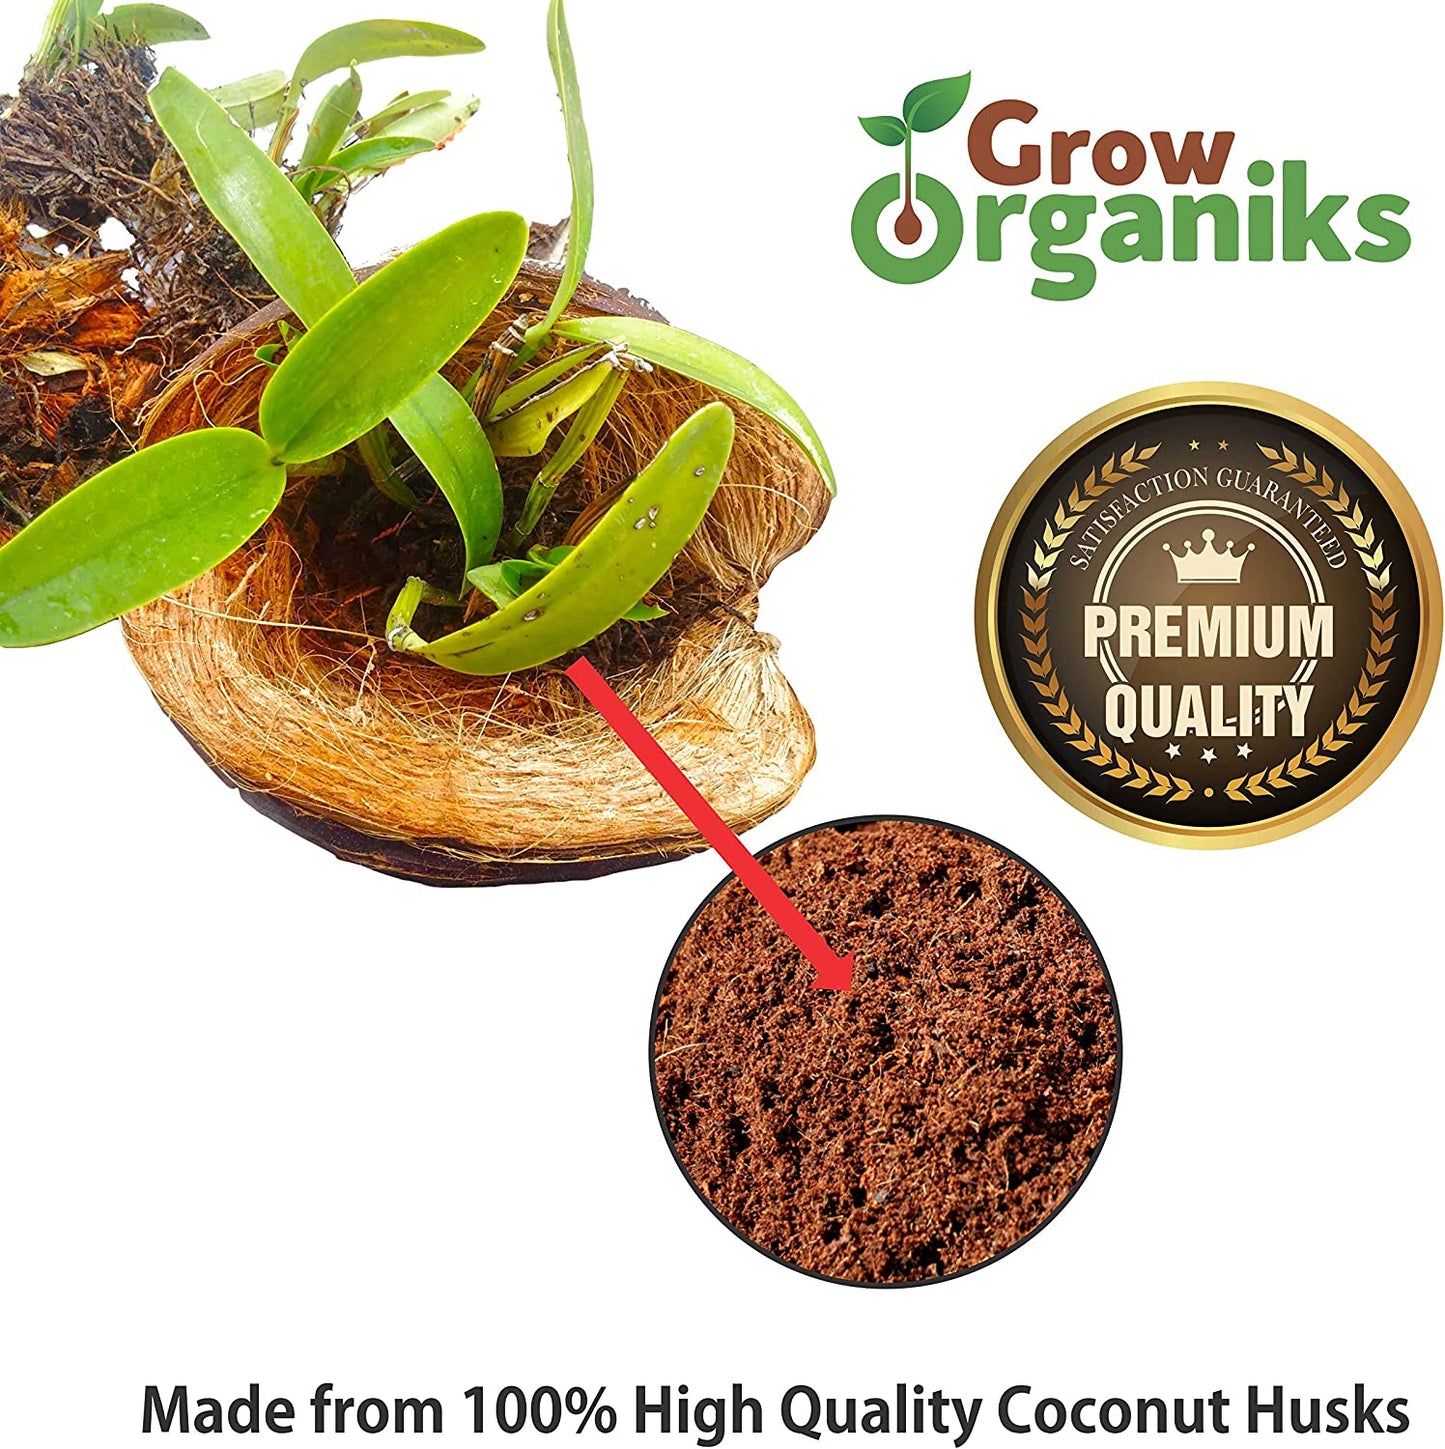 Coco Coir Pith,Coco Peat Brick-1.4 Lbs EA,(6 Bricks), OMRI Listed for Organic Use, Expansion between 10-12L,Universal Potting Substrate for All Plants & Crops.